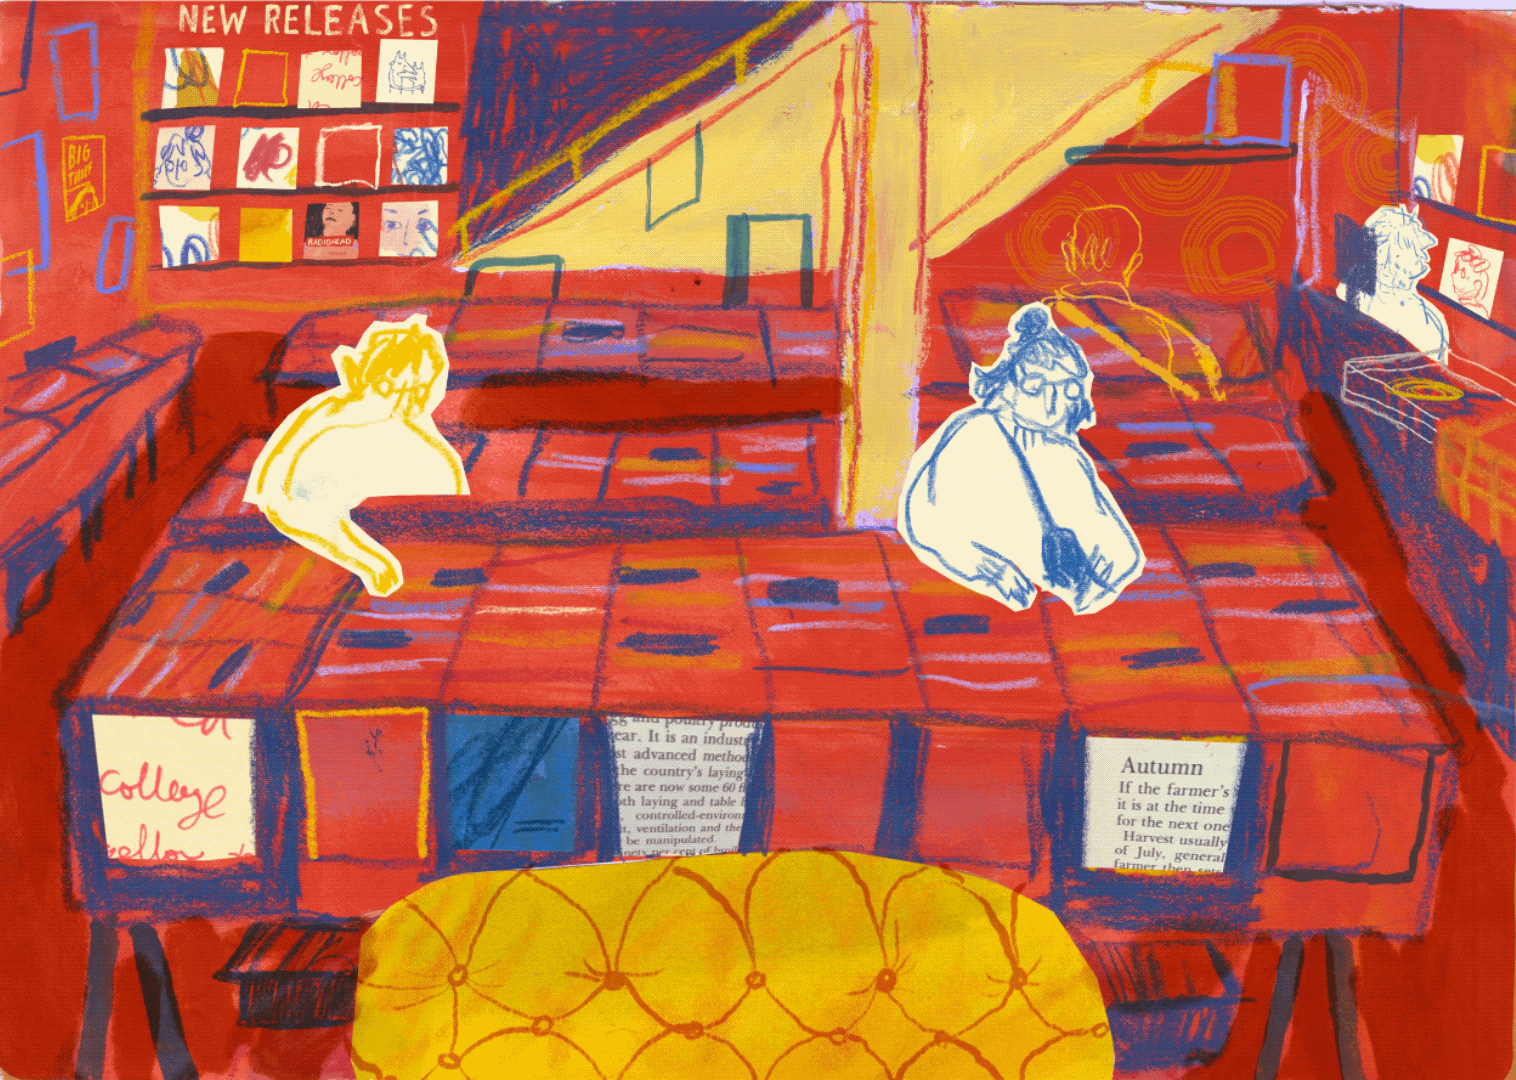 Record Store. Moving illustration inspired by my local record store, for a speculative editorial piece.